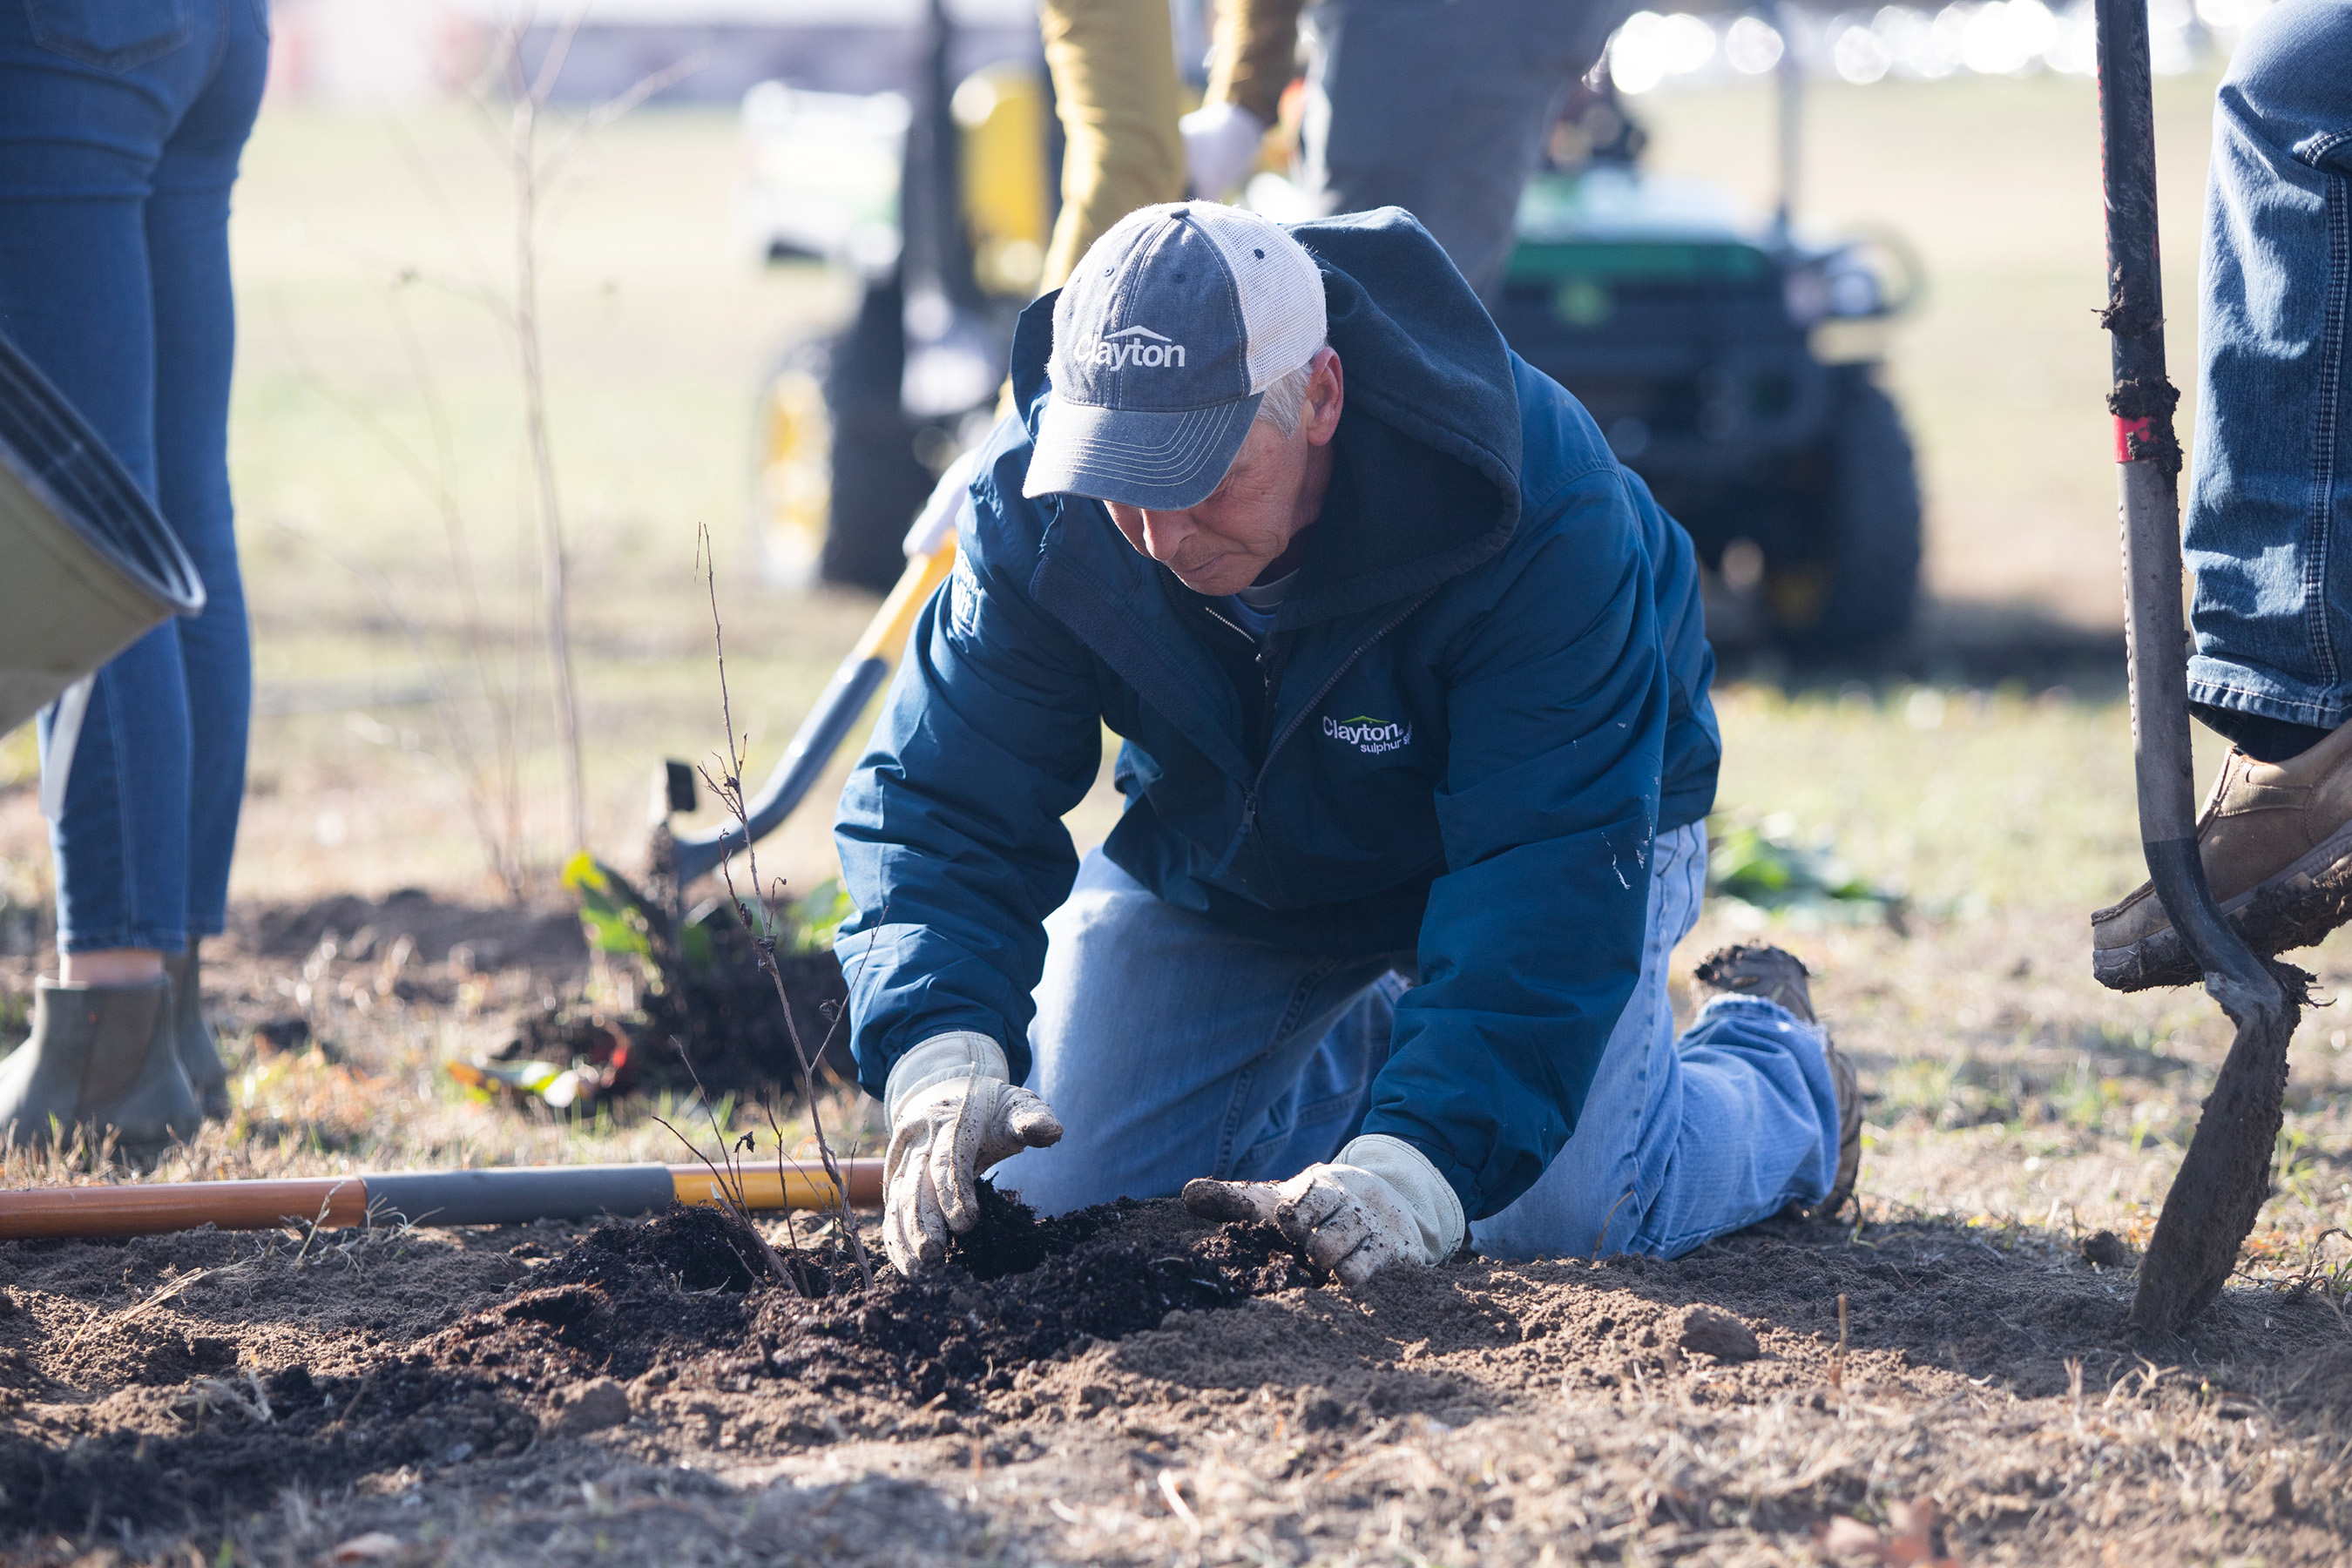 Clayton team members have used their Volunteer Time Off in several ways like planting trees to help the local ecosystem.